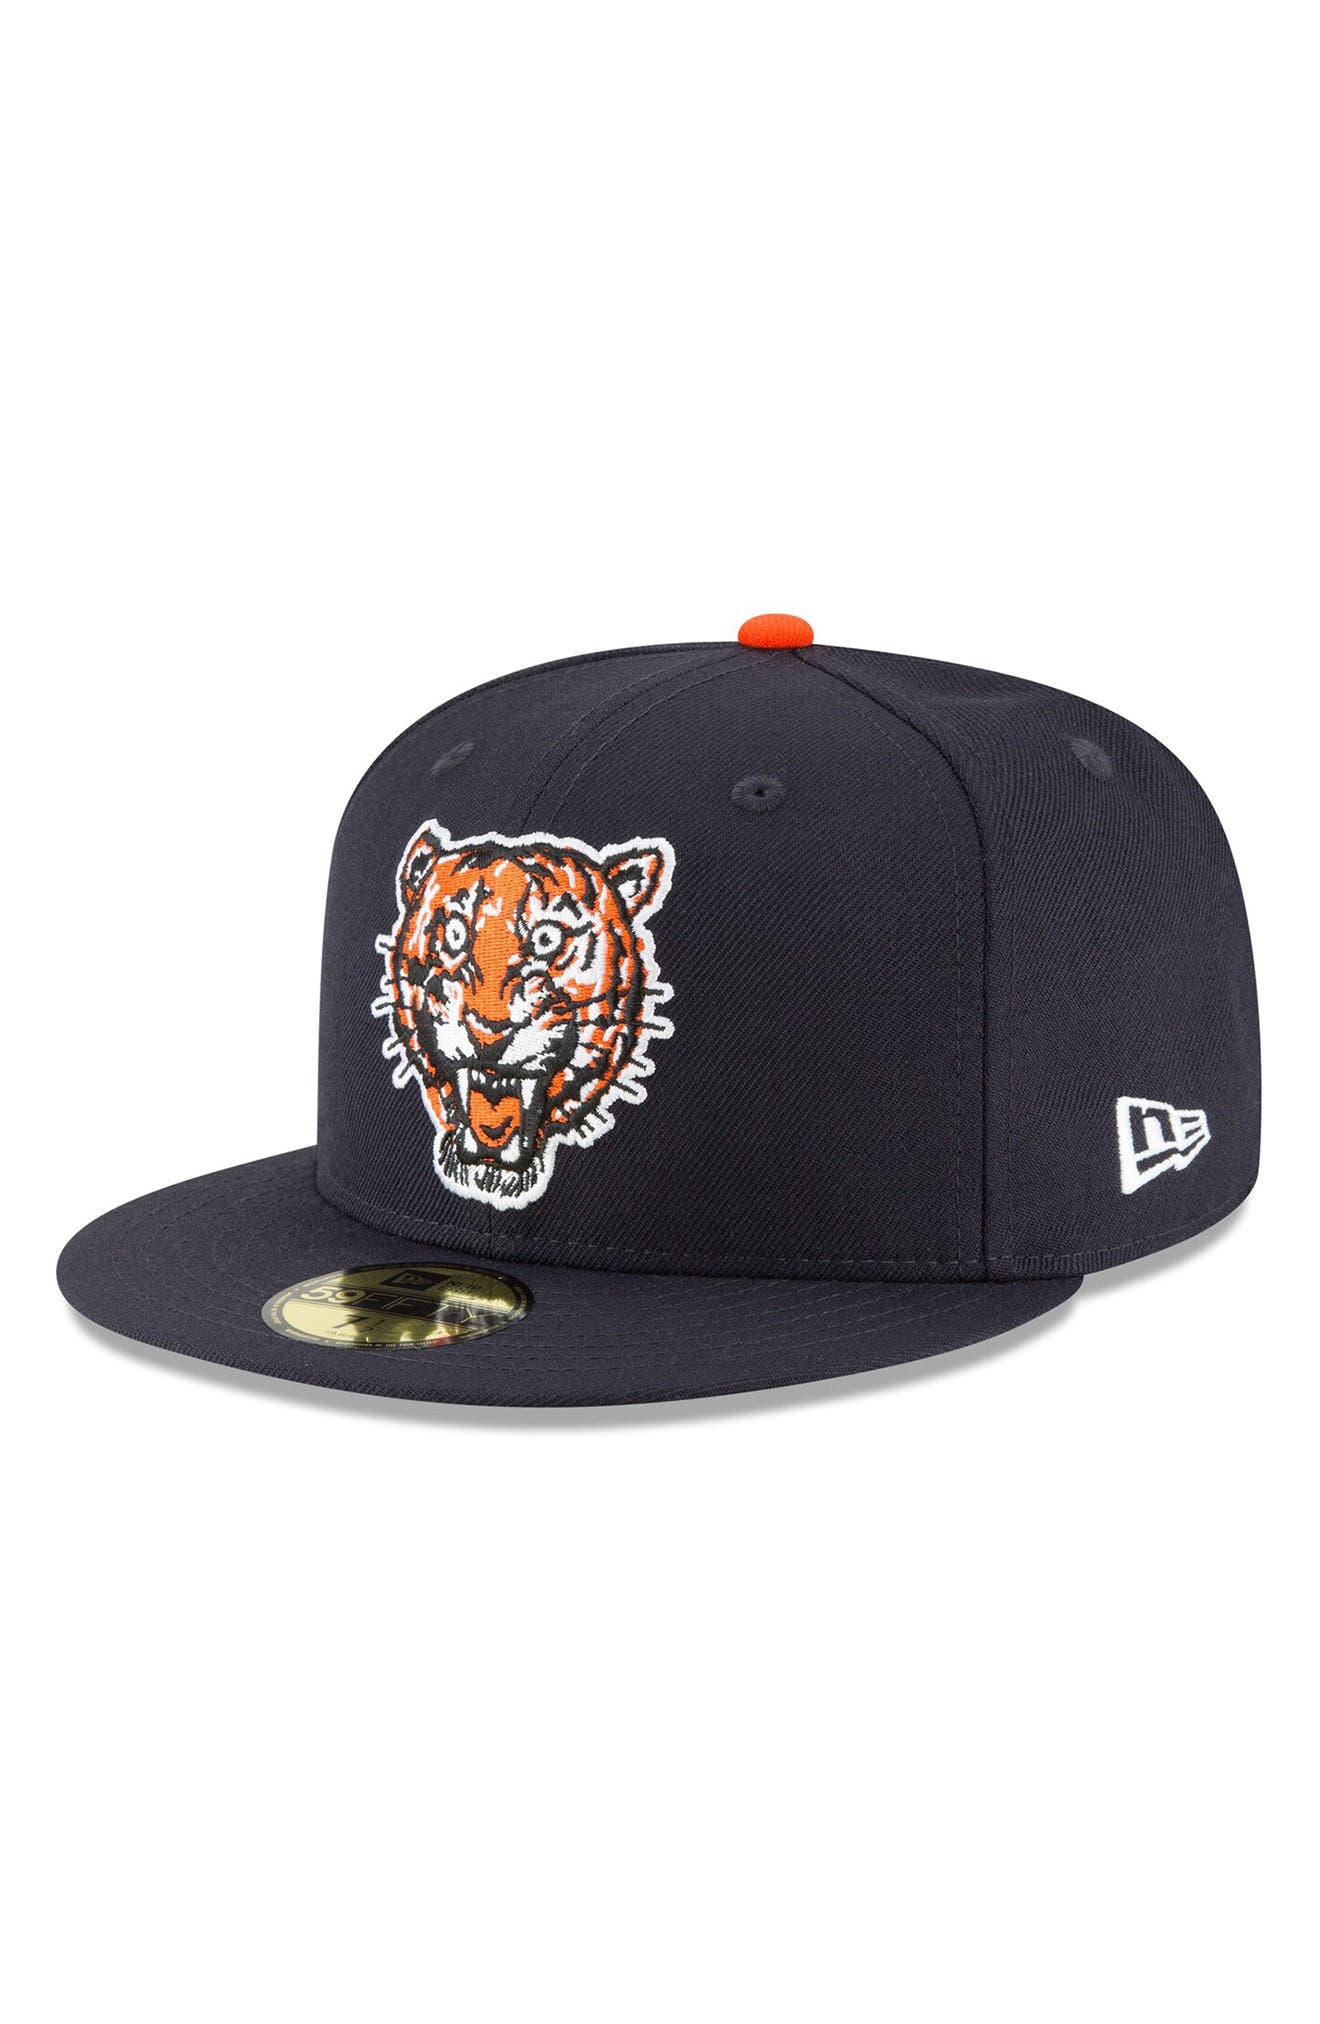 New Era 59Fifty Fitted Cap COOPERSTOWN Detroit Tigers 